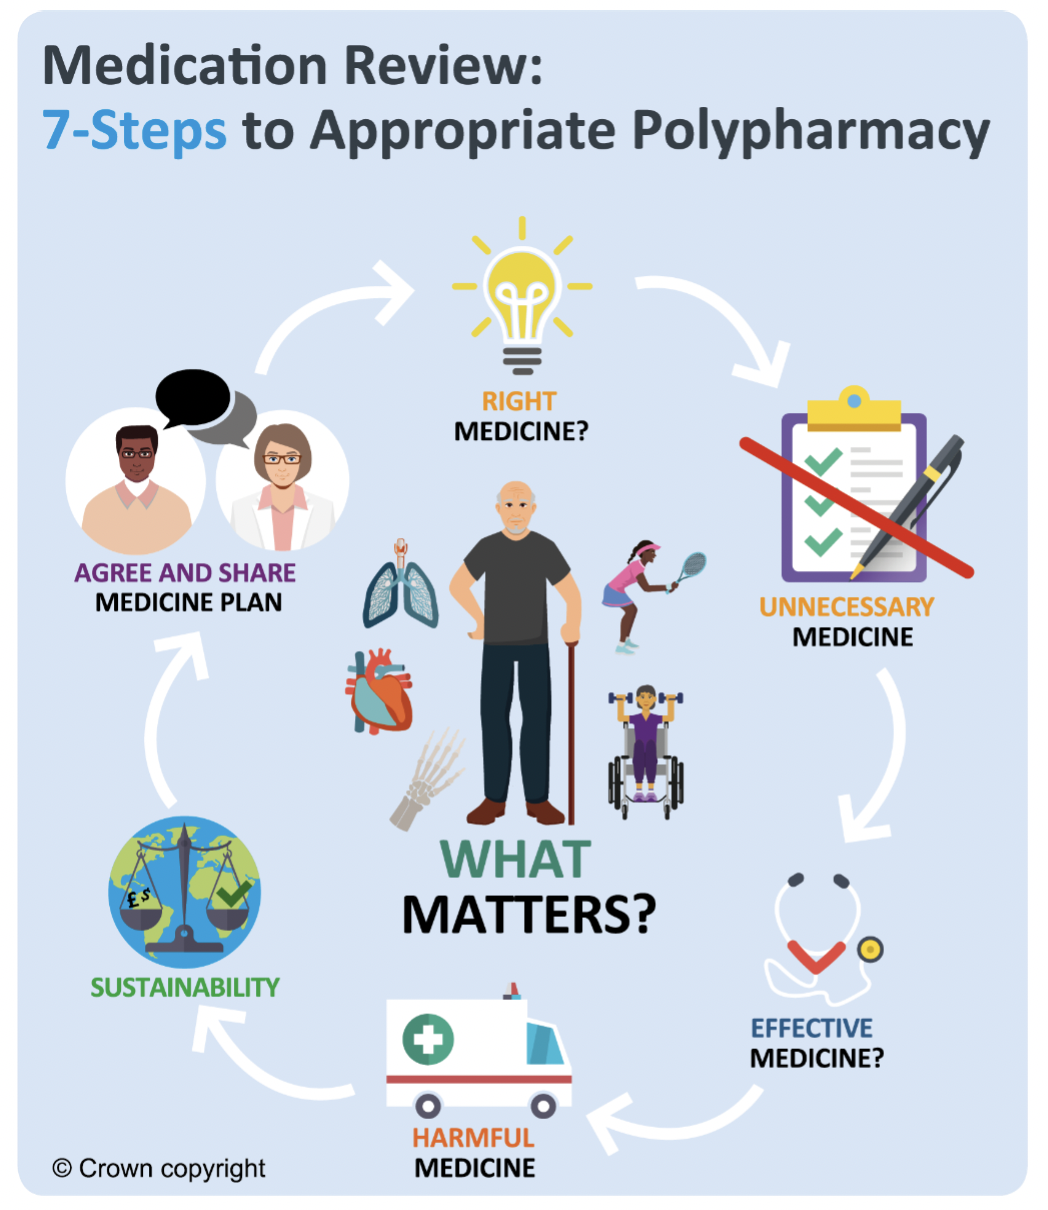 Flow chart for 7-Steps medication review process